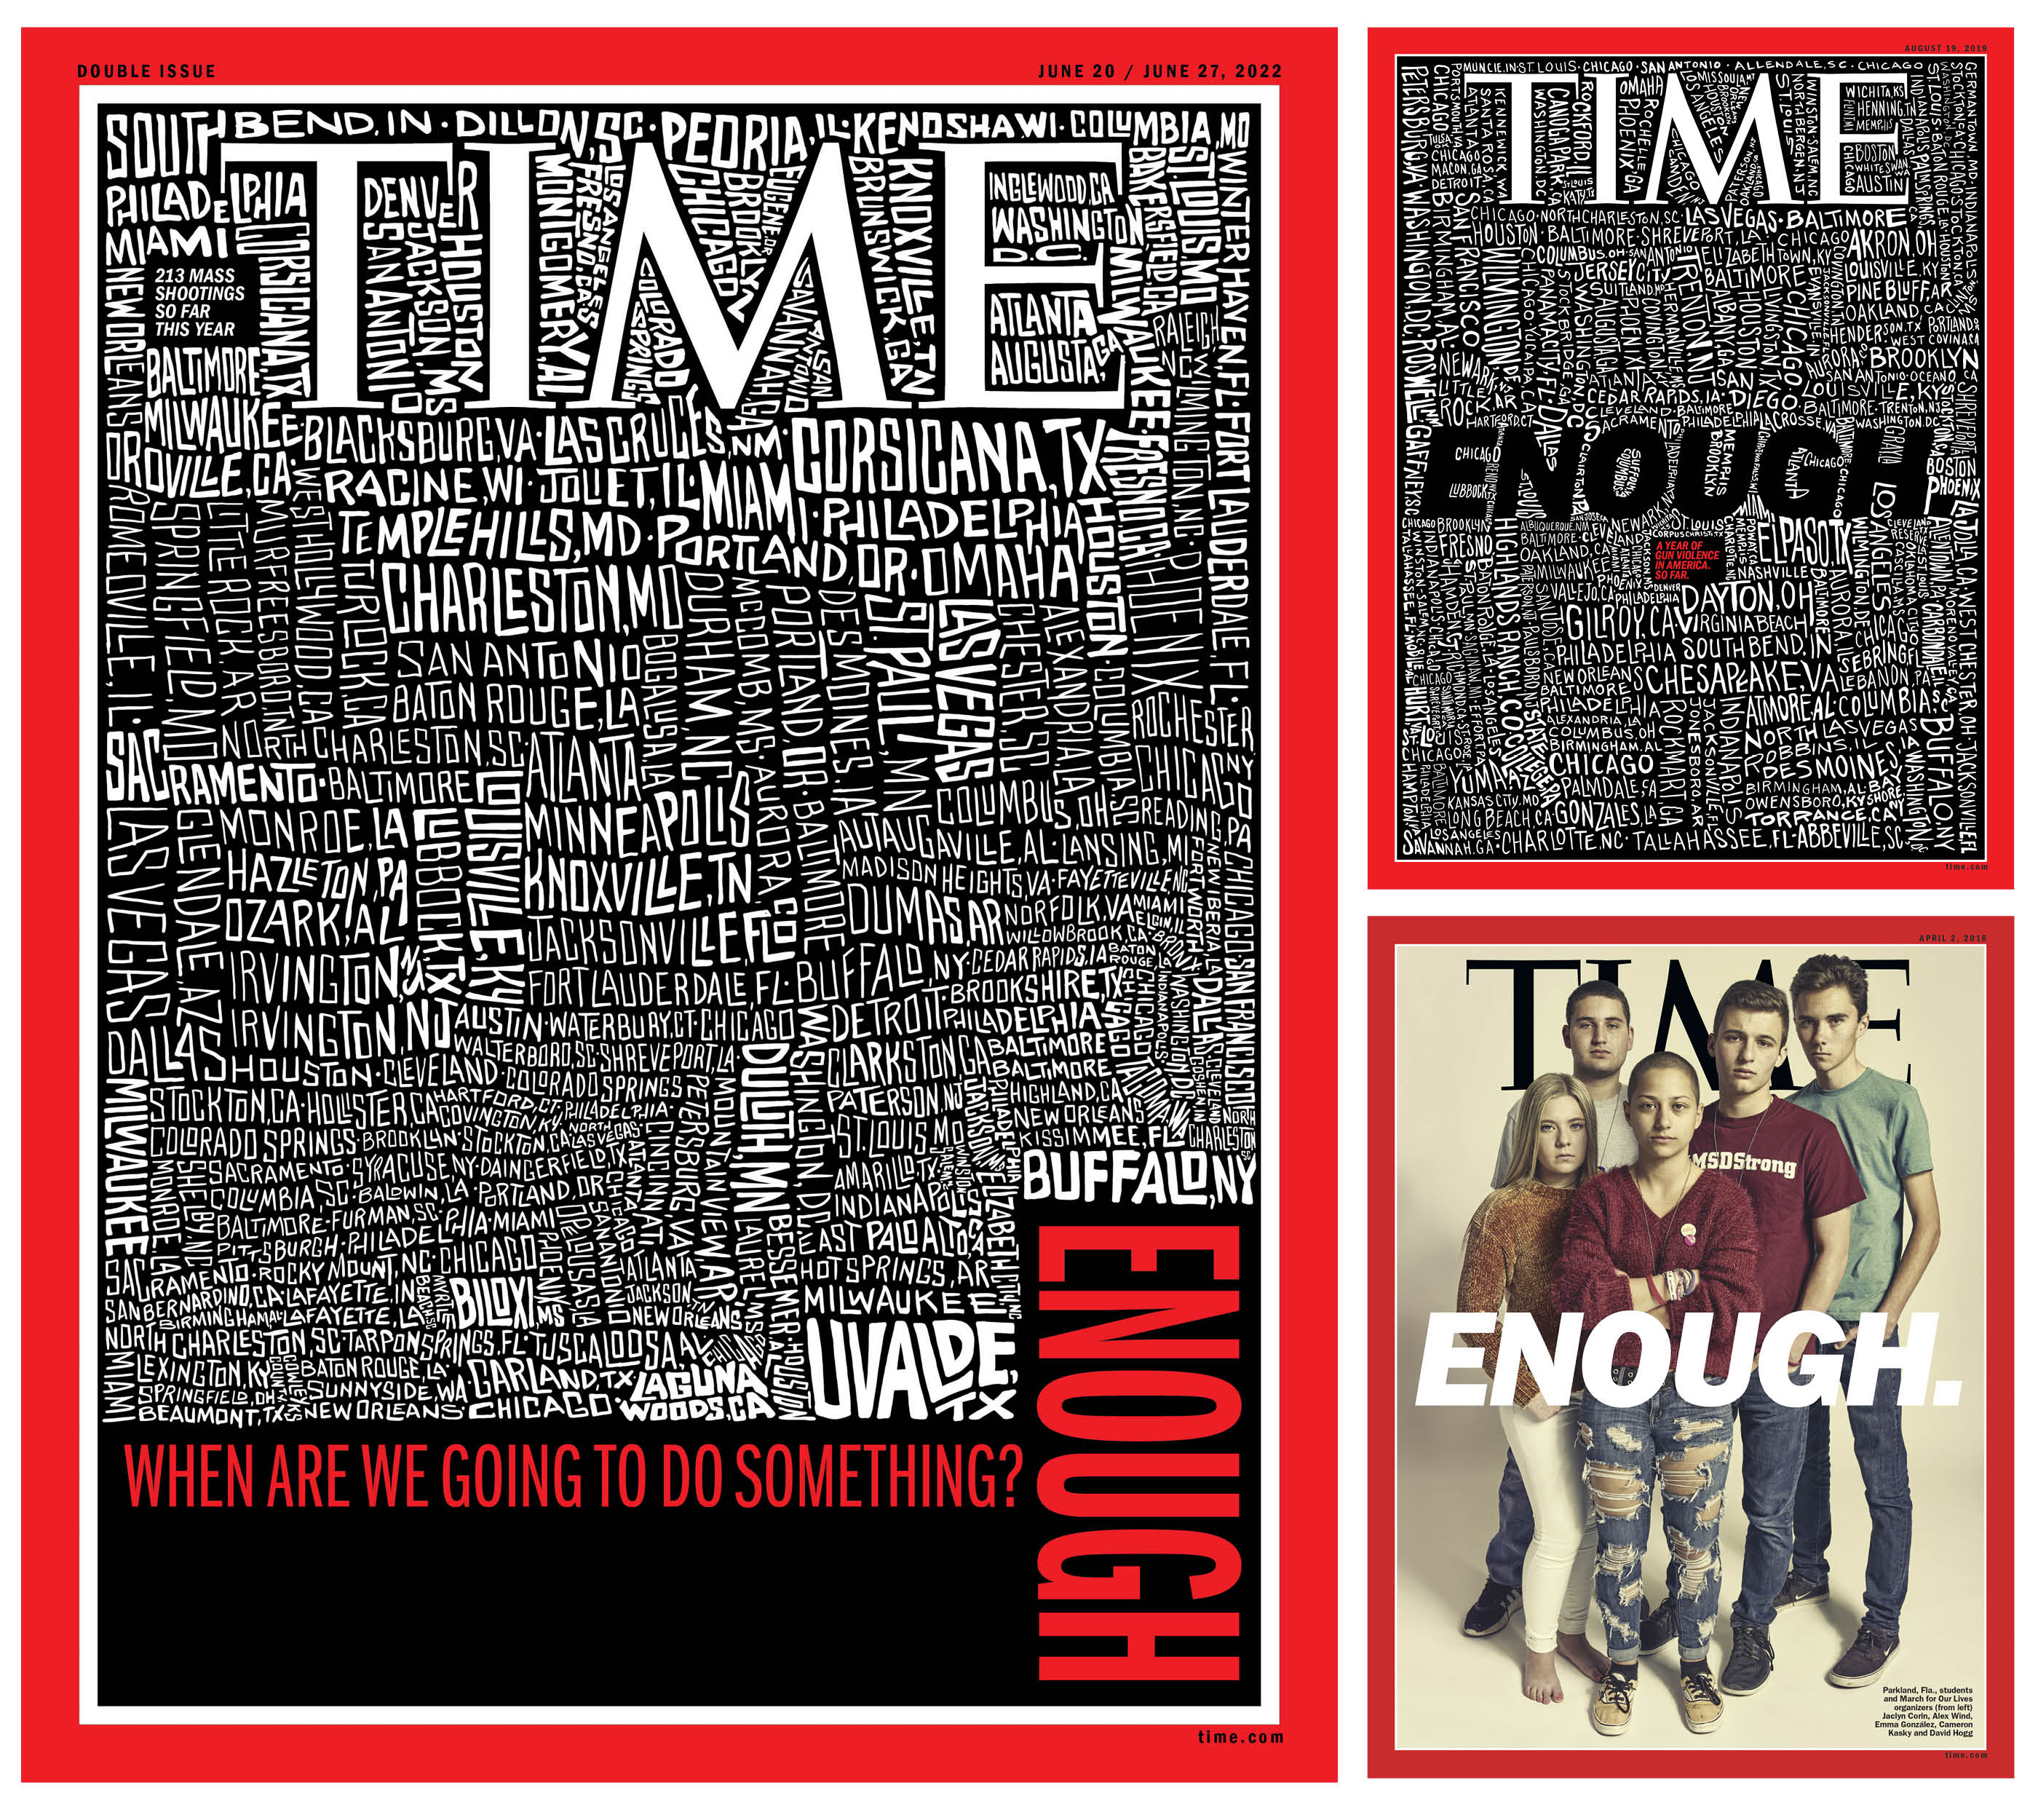 TIME Enough covers